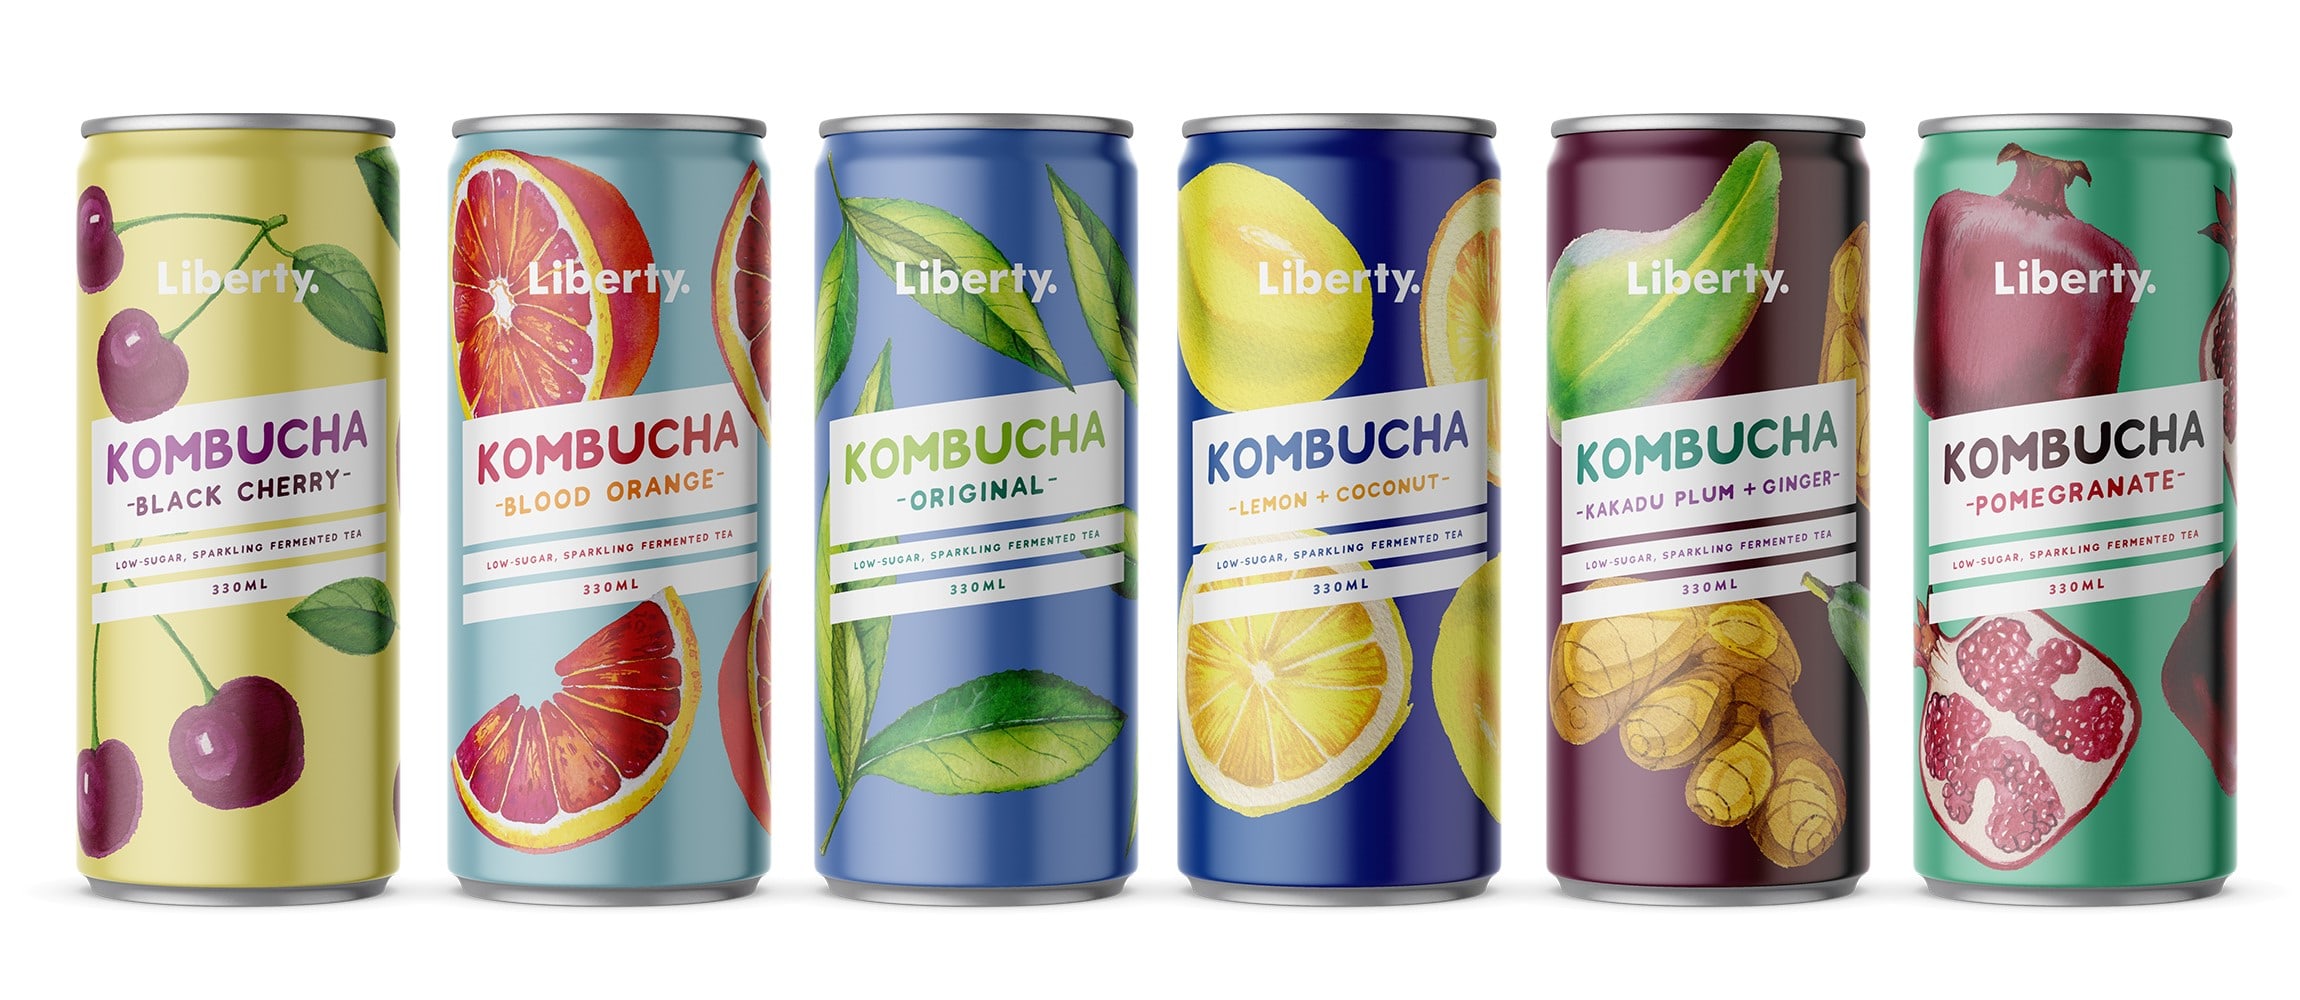 Liberty Kombucha cans in a variety of flavours